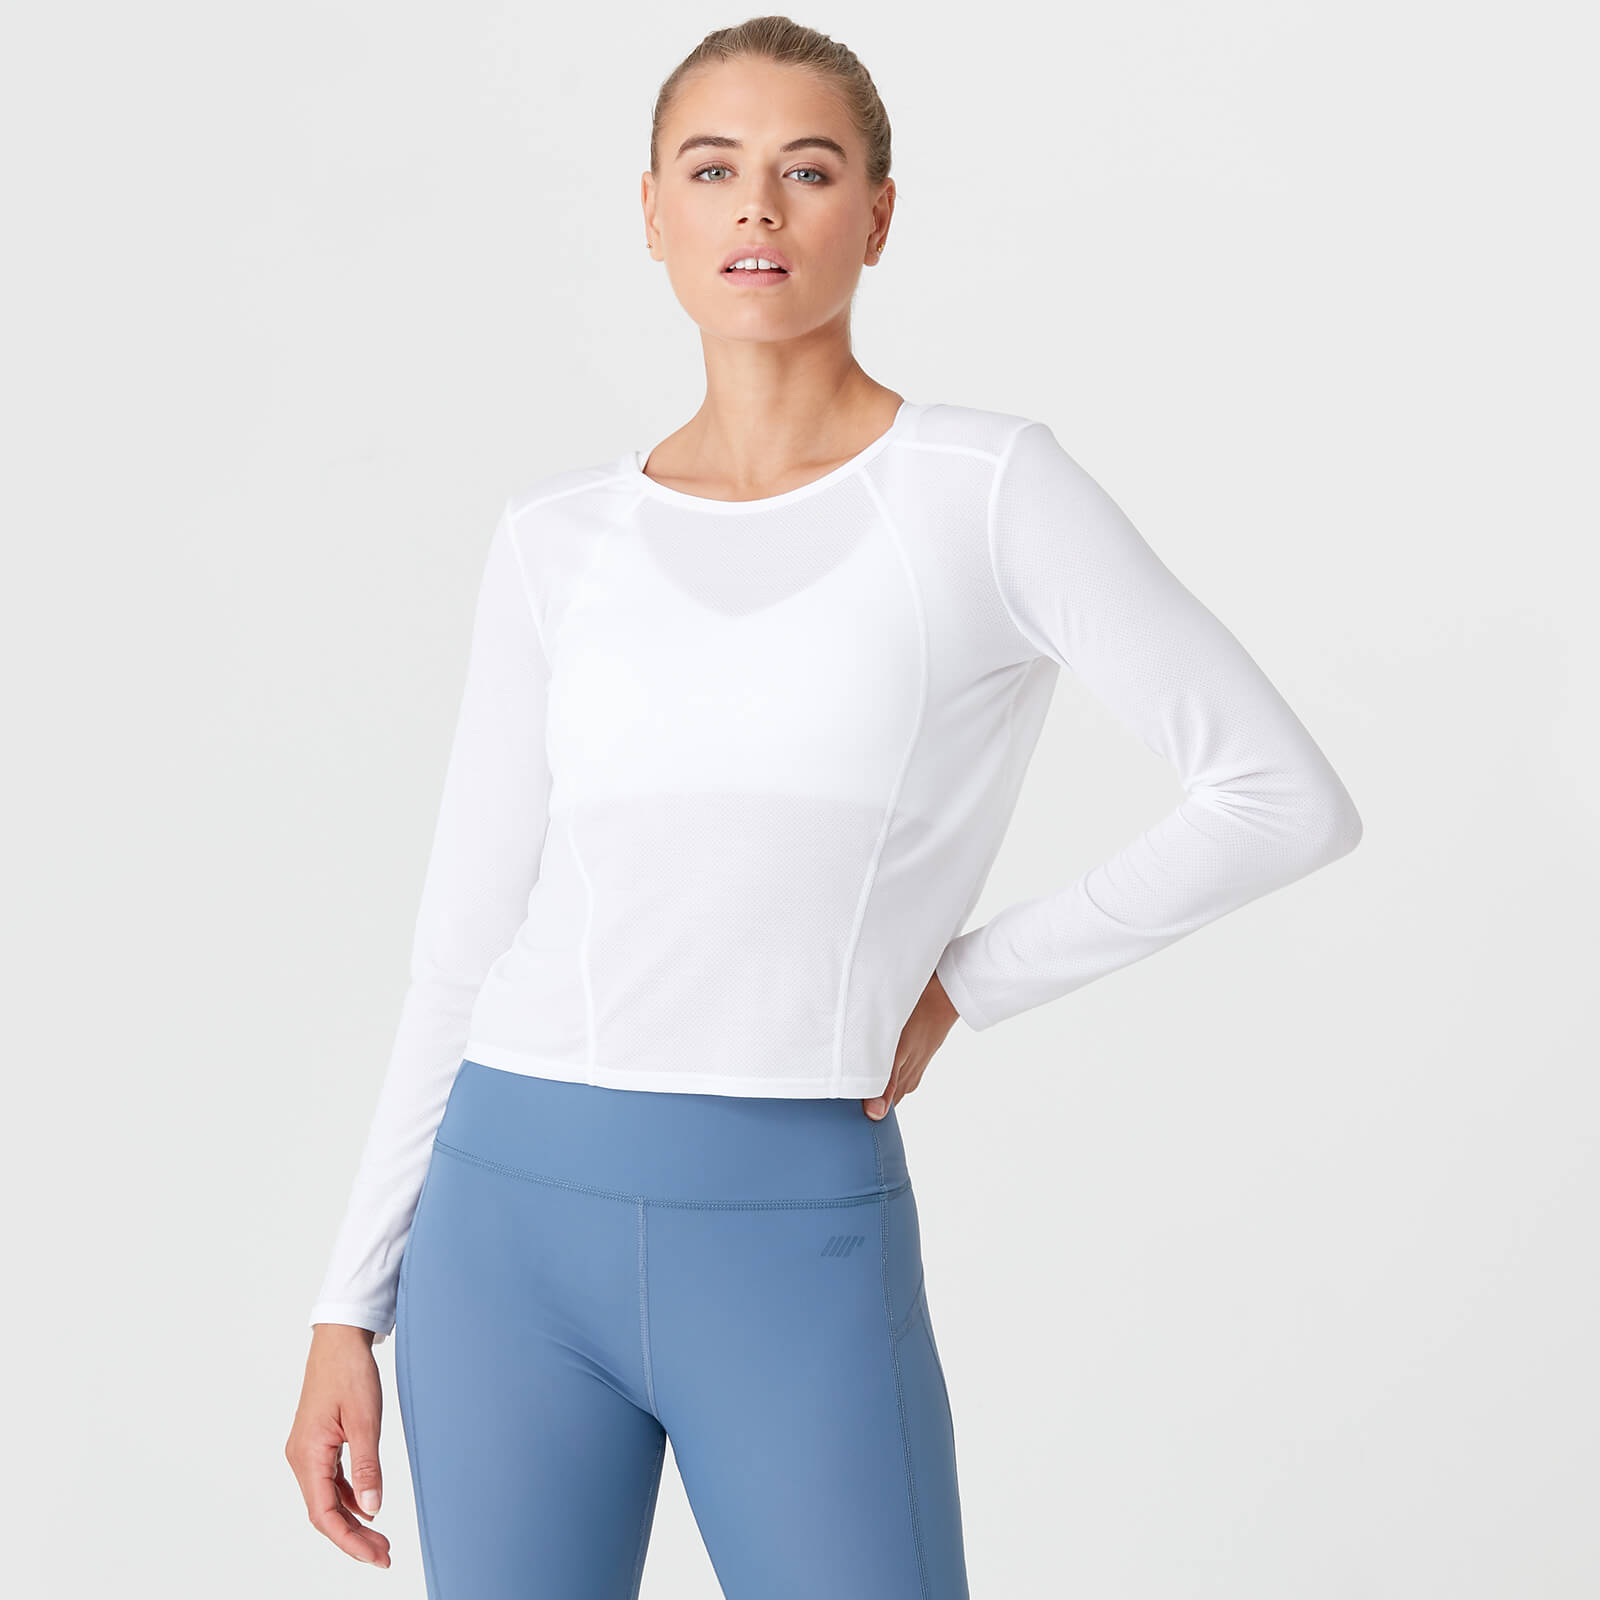 Myprotein Dry Tech Long Sleeve T-Shirt - White - S